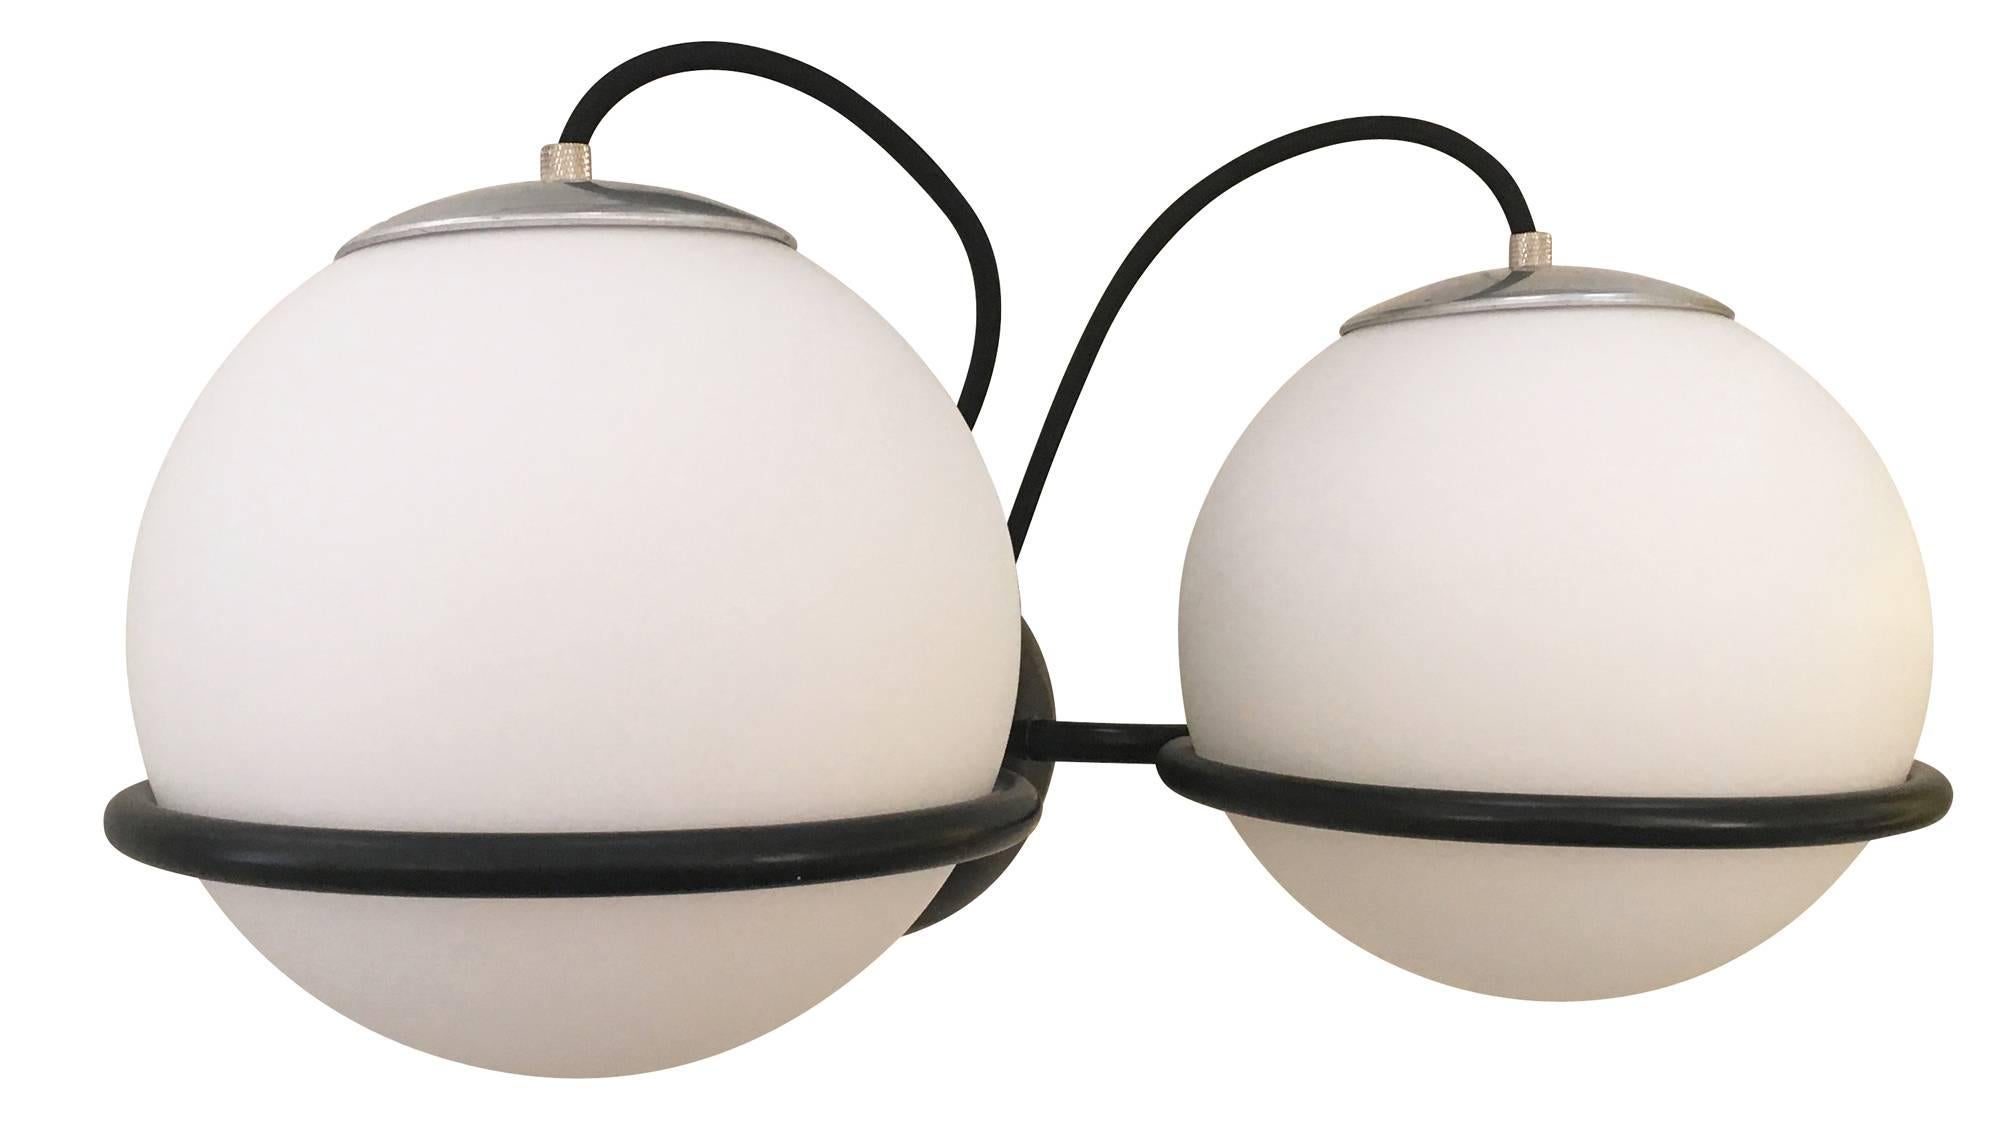 Unusually large sconces by Gino Sarfatti for Arteluce each featuring two large frosted glass globes on a black lacquered frame. The globes can be positioned with the wire upwards or downwards. Original label present on all of them. Also available